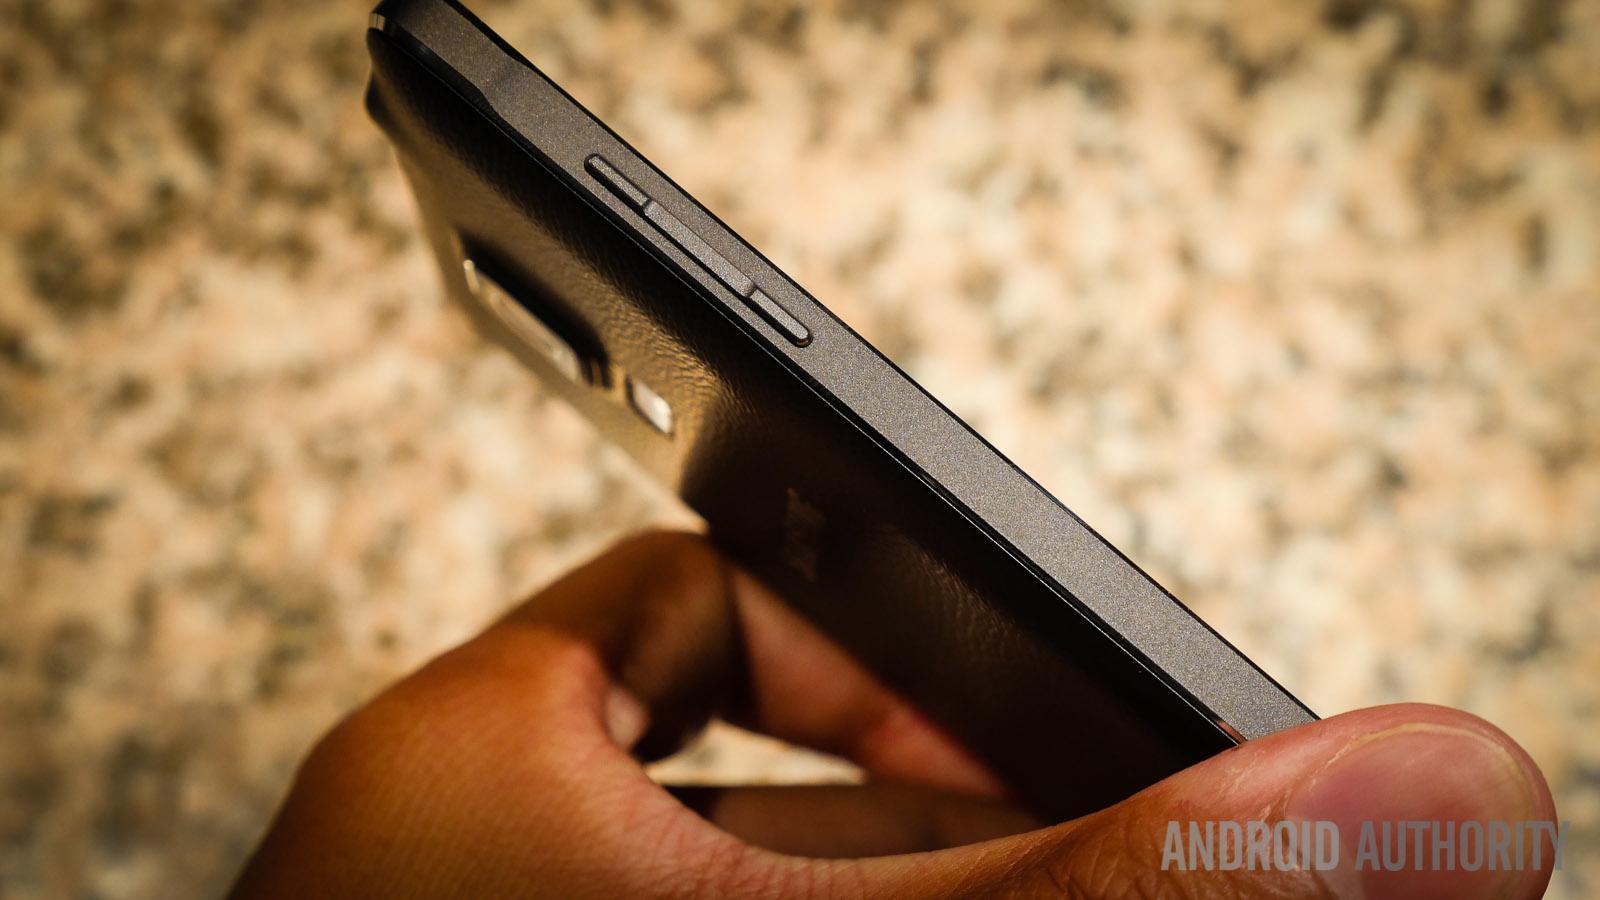 samsung galaxy note 4 first impressions (10 of 20)